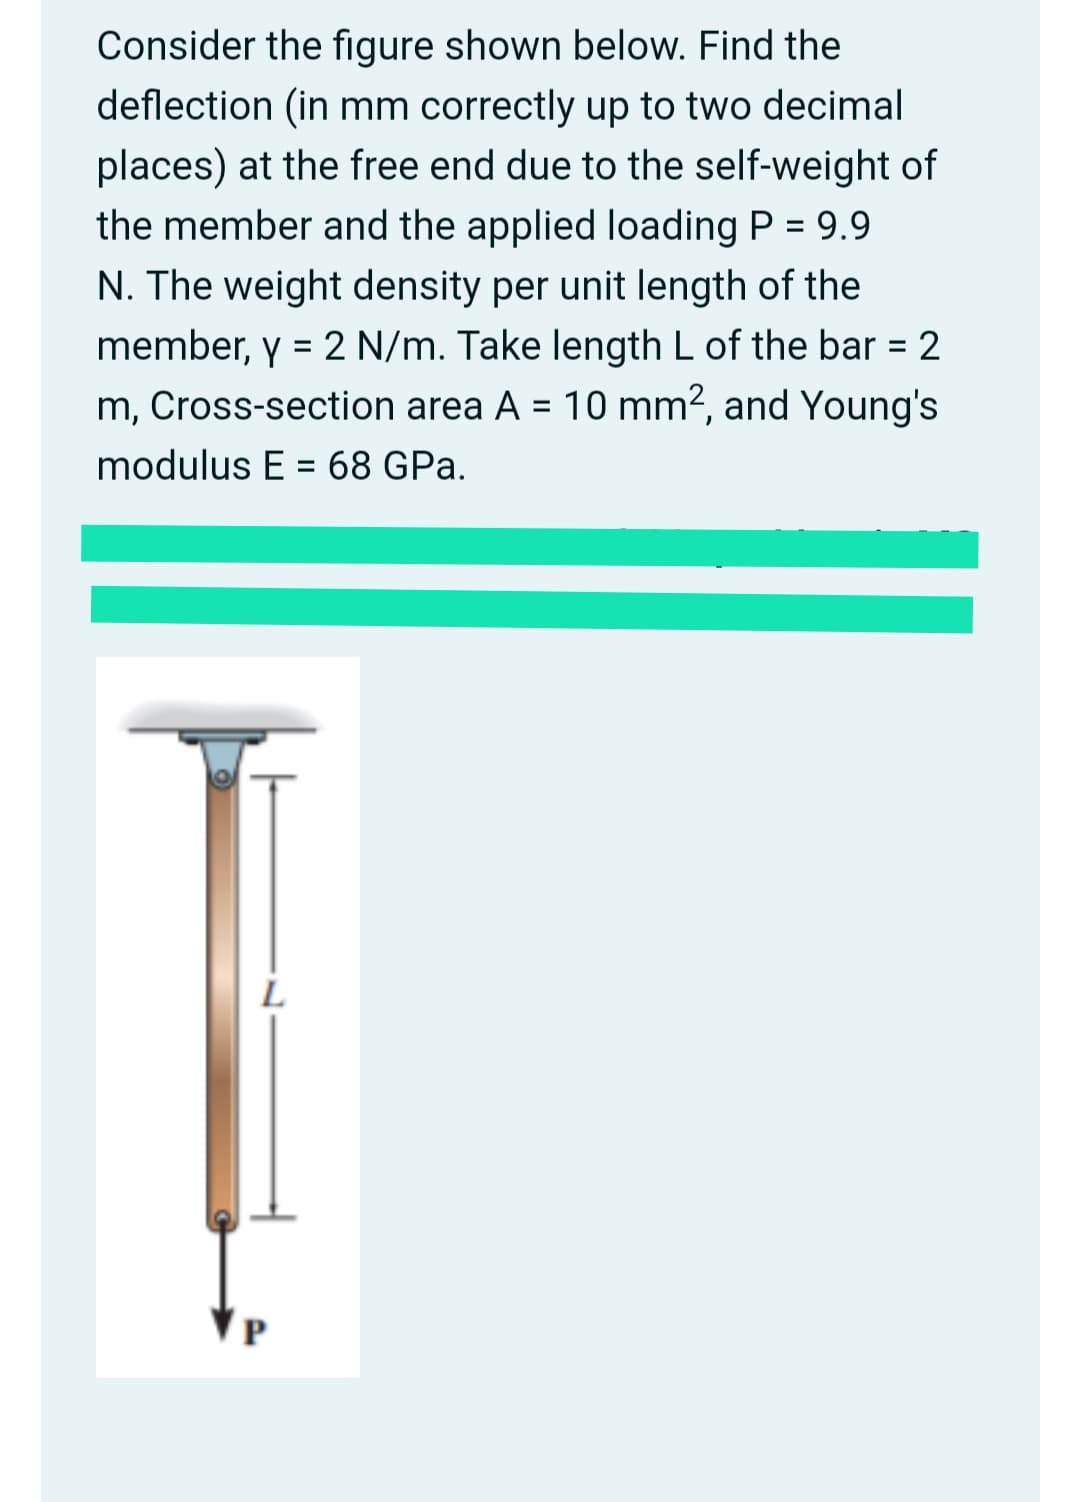 Consider the figure shown below. Find the
deflection (in mm correctly up to two decimal
places) at the free end due to the self-weight of
the member and the applied loading P = 9.9
%3D
N. The weight density per unit length of the
member, y = 2 N/m. Take length L of the bar = 2
m, Cross-section area A = 10 mm?, and Young's
%3D
%3D
modulus E = 68 GPa.
%3D
